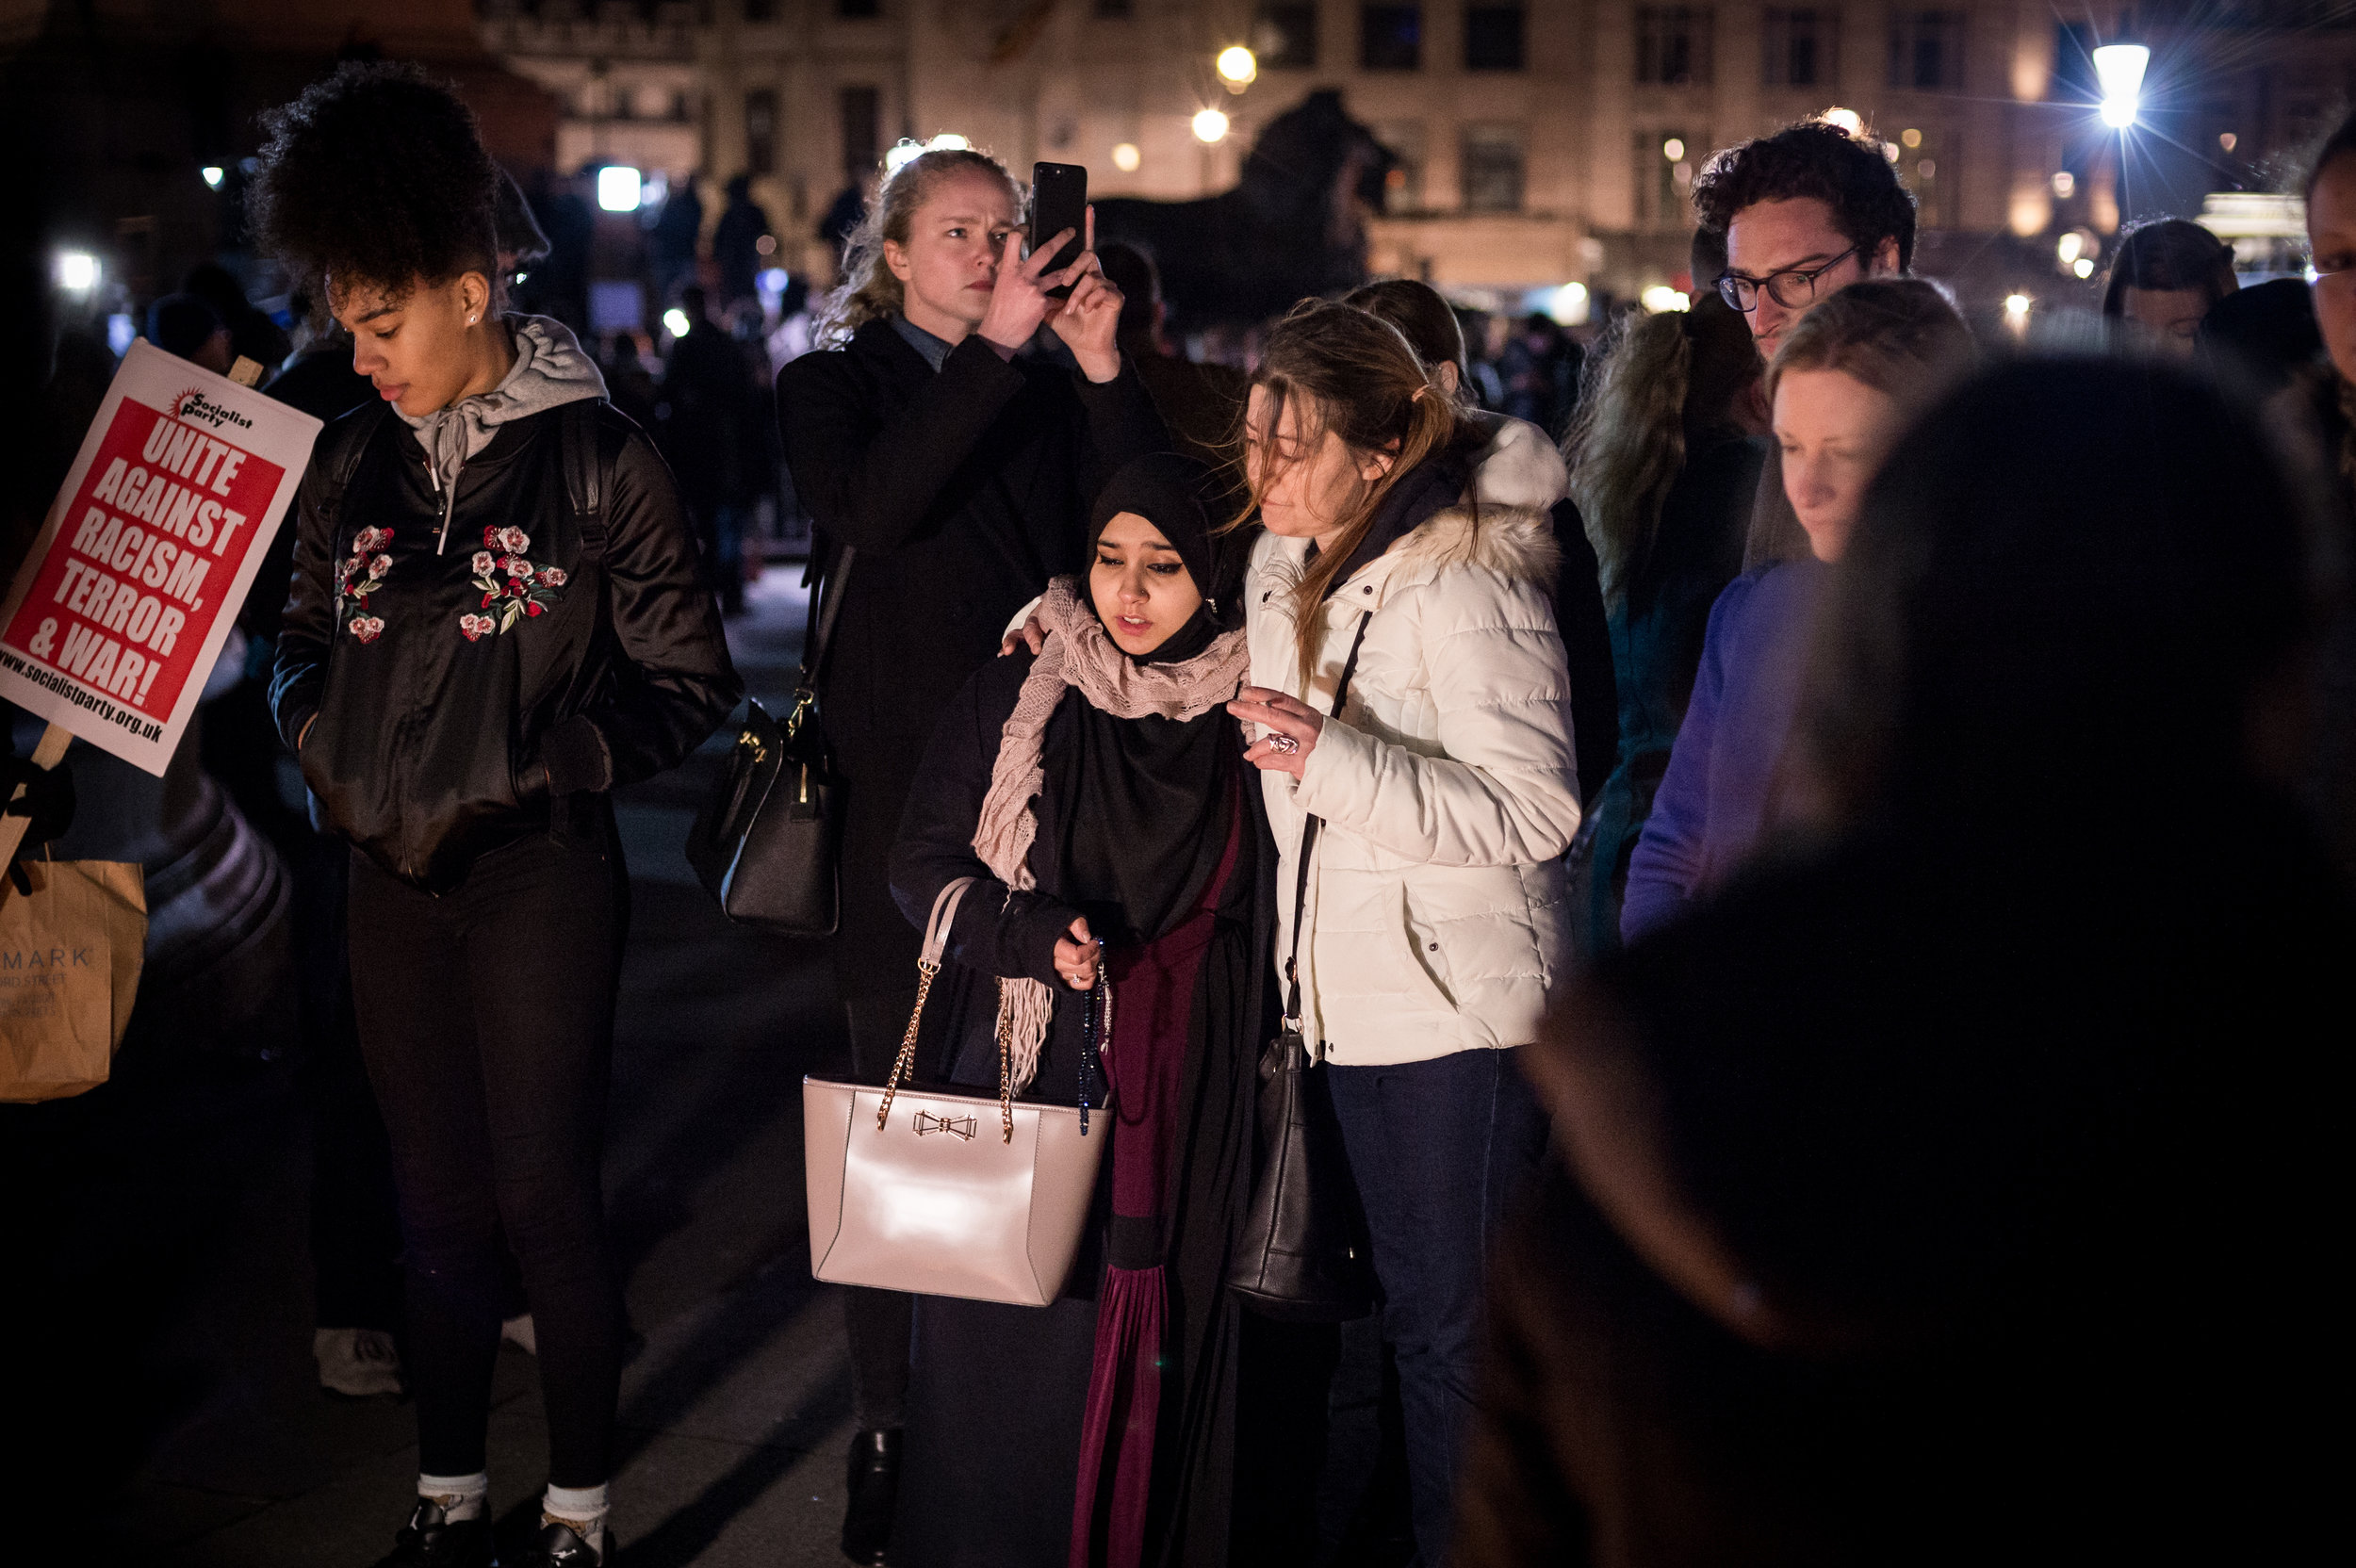  A visibly distressed Muslim woman is comforted by a friend.&nbsp; 